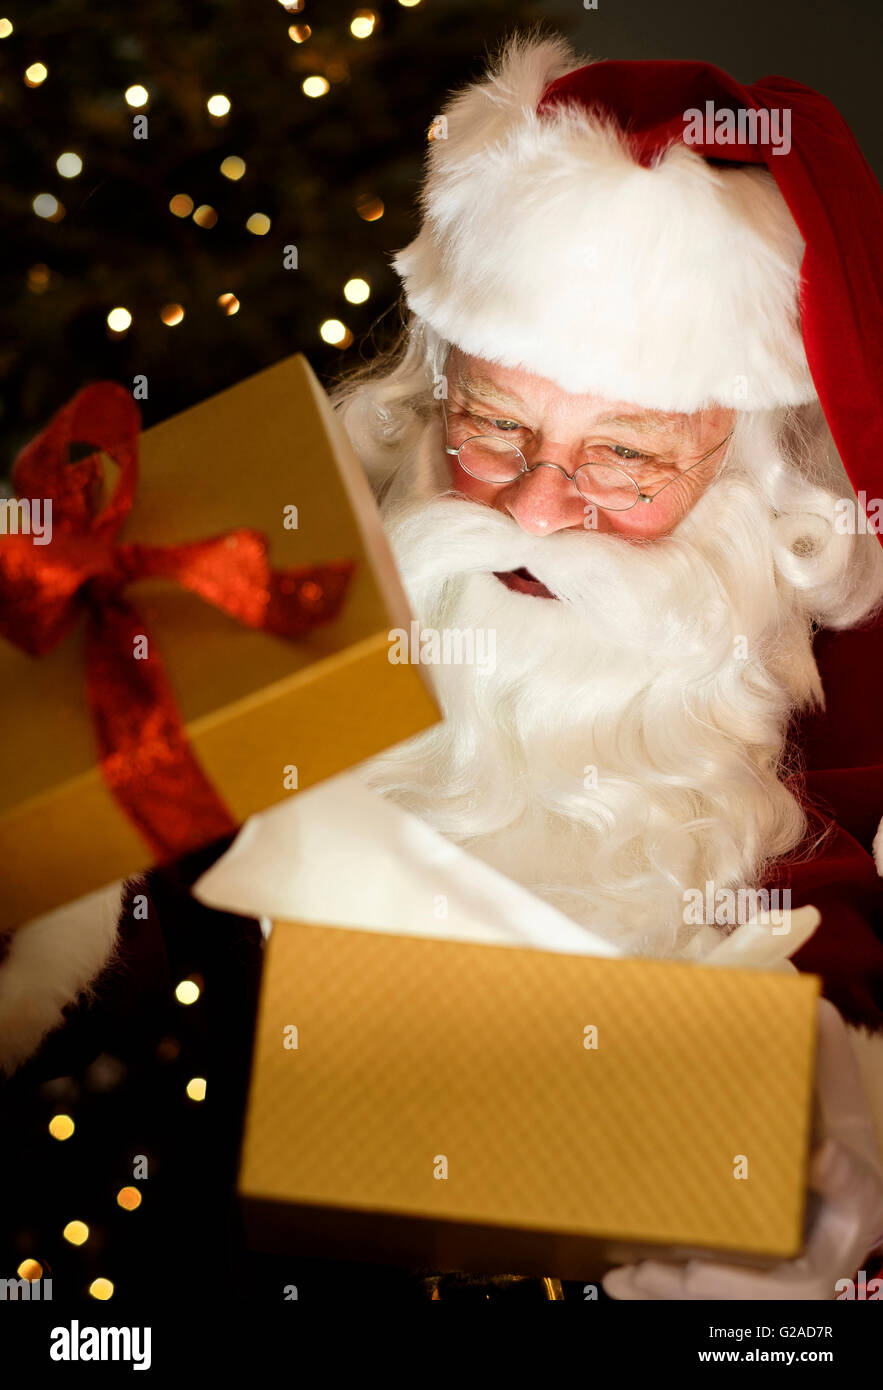 Portrait of Santa Claus opening Christmas presents Stock Photo